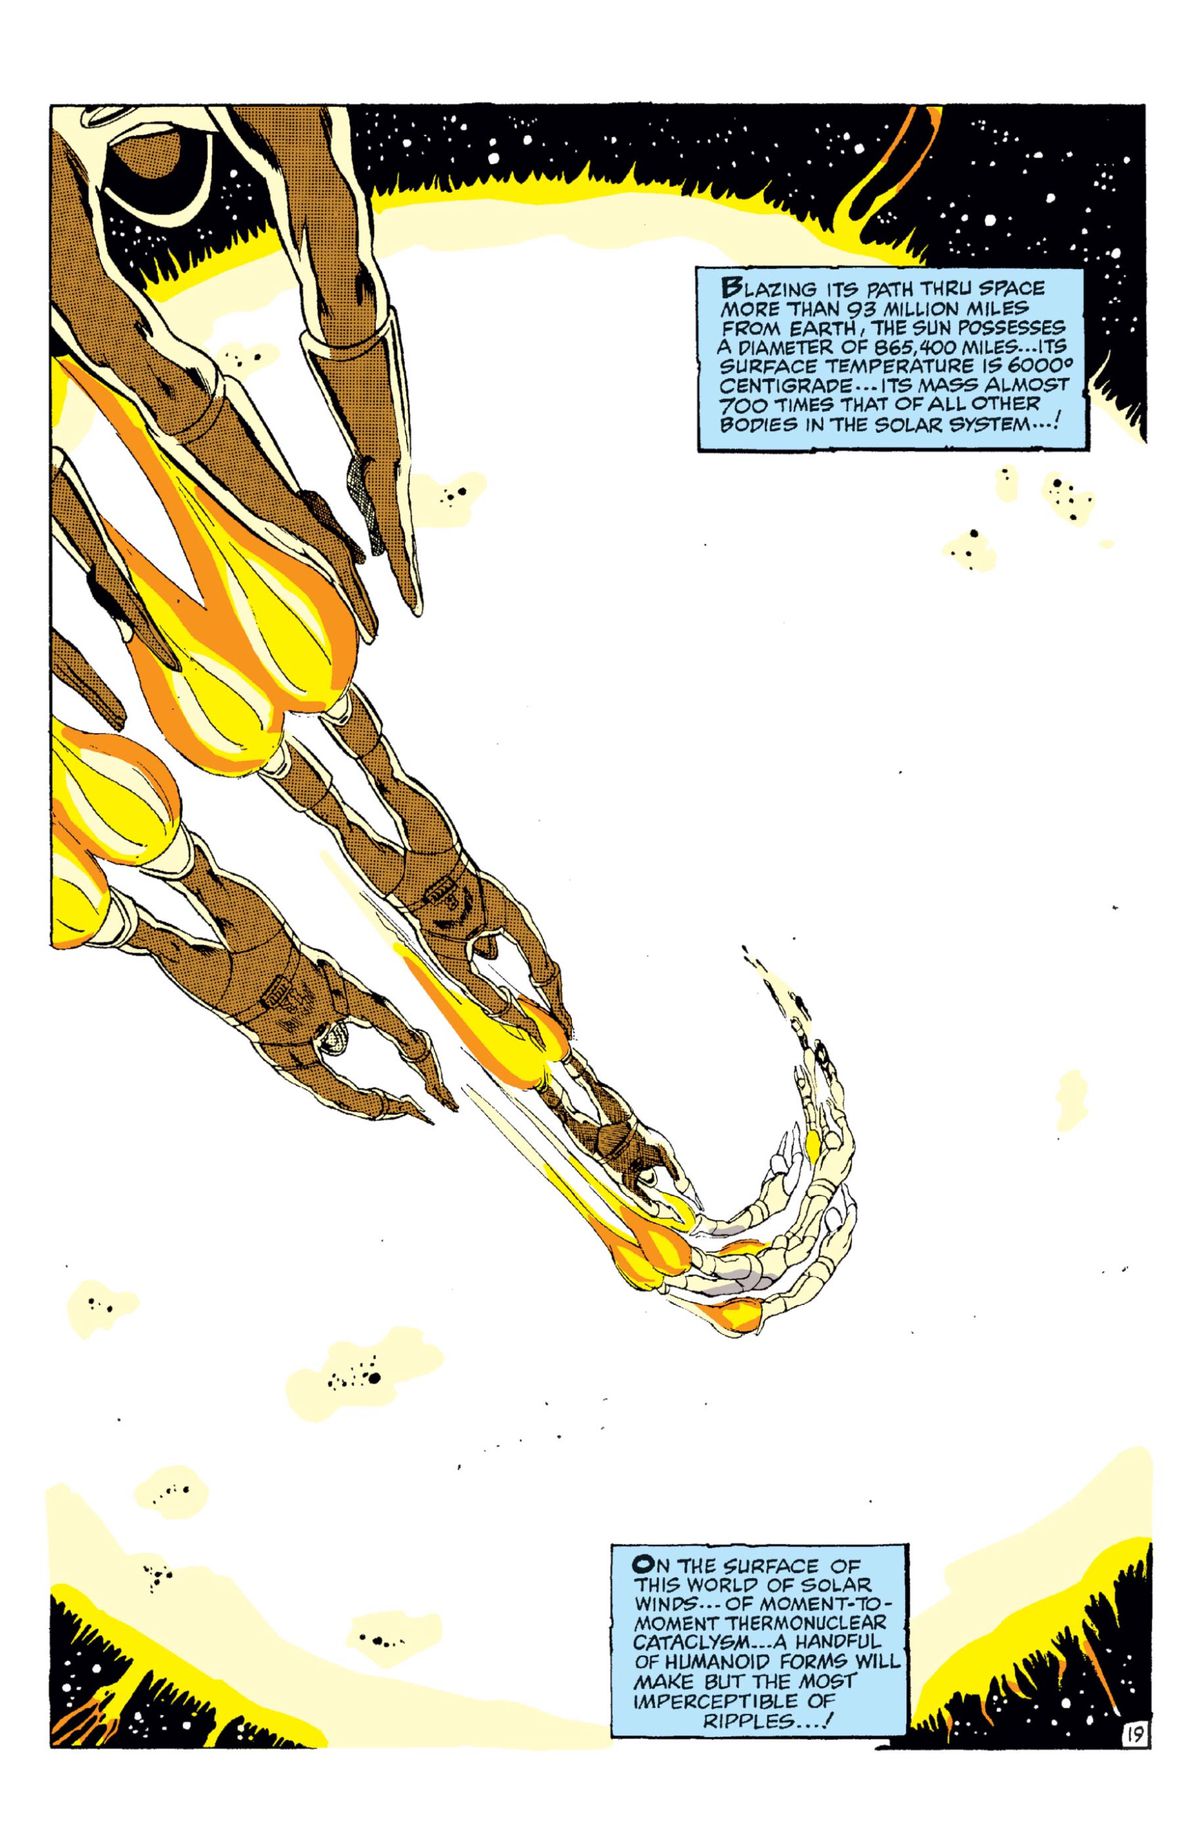 Dozens of Sentinels rocket off to fight the Sun and are swallowed by its incandescent heat, never to be seen again, in X-Men #59, Marvel Comics (1969). 